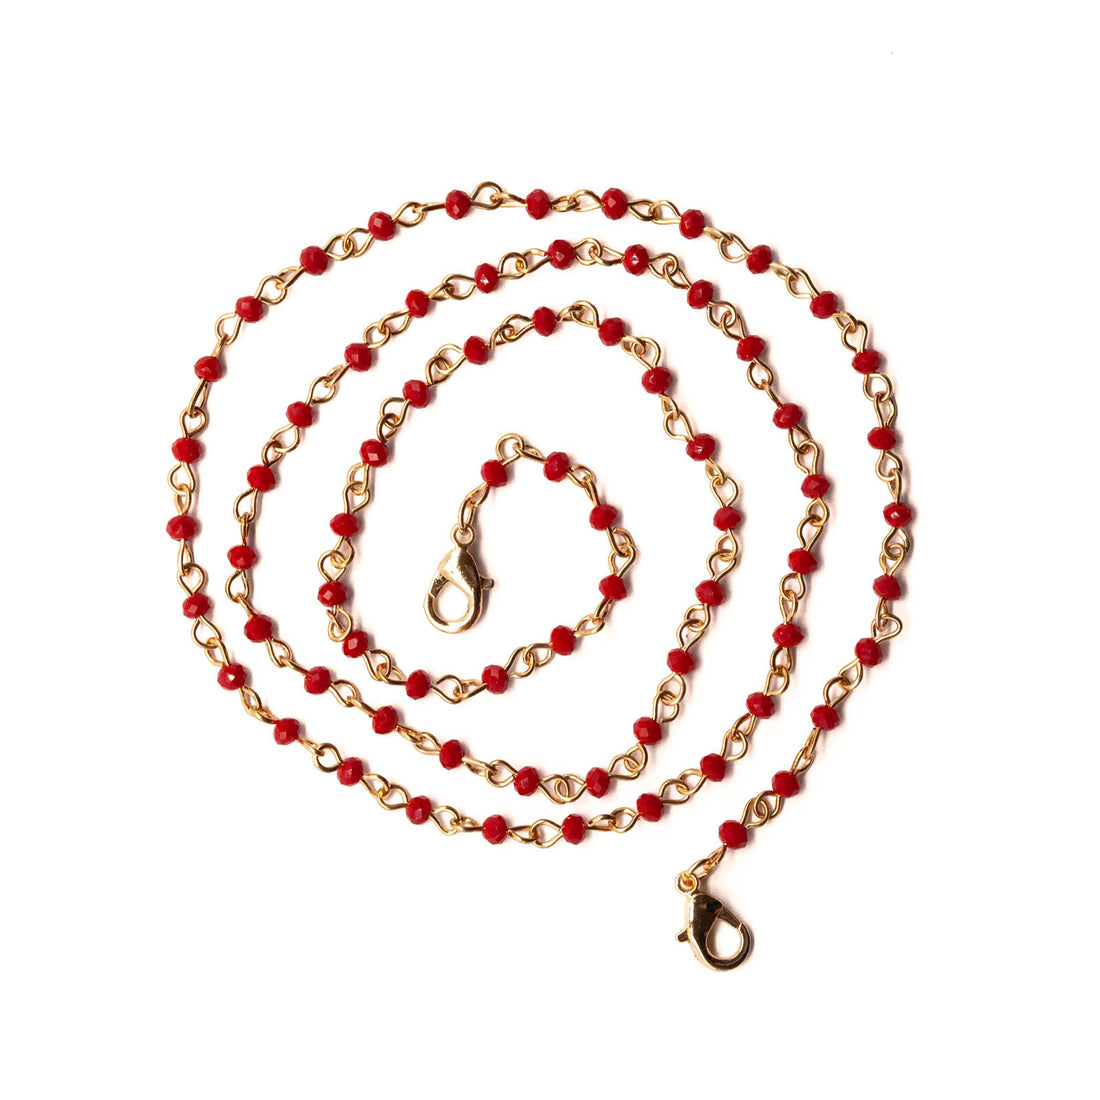 Gold Chain Face Mask Lanyard Necklace with Red Beads MASK-NECKLACE - rockflowerpaper